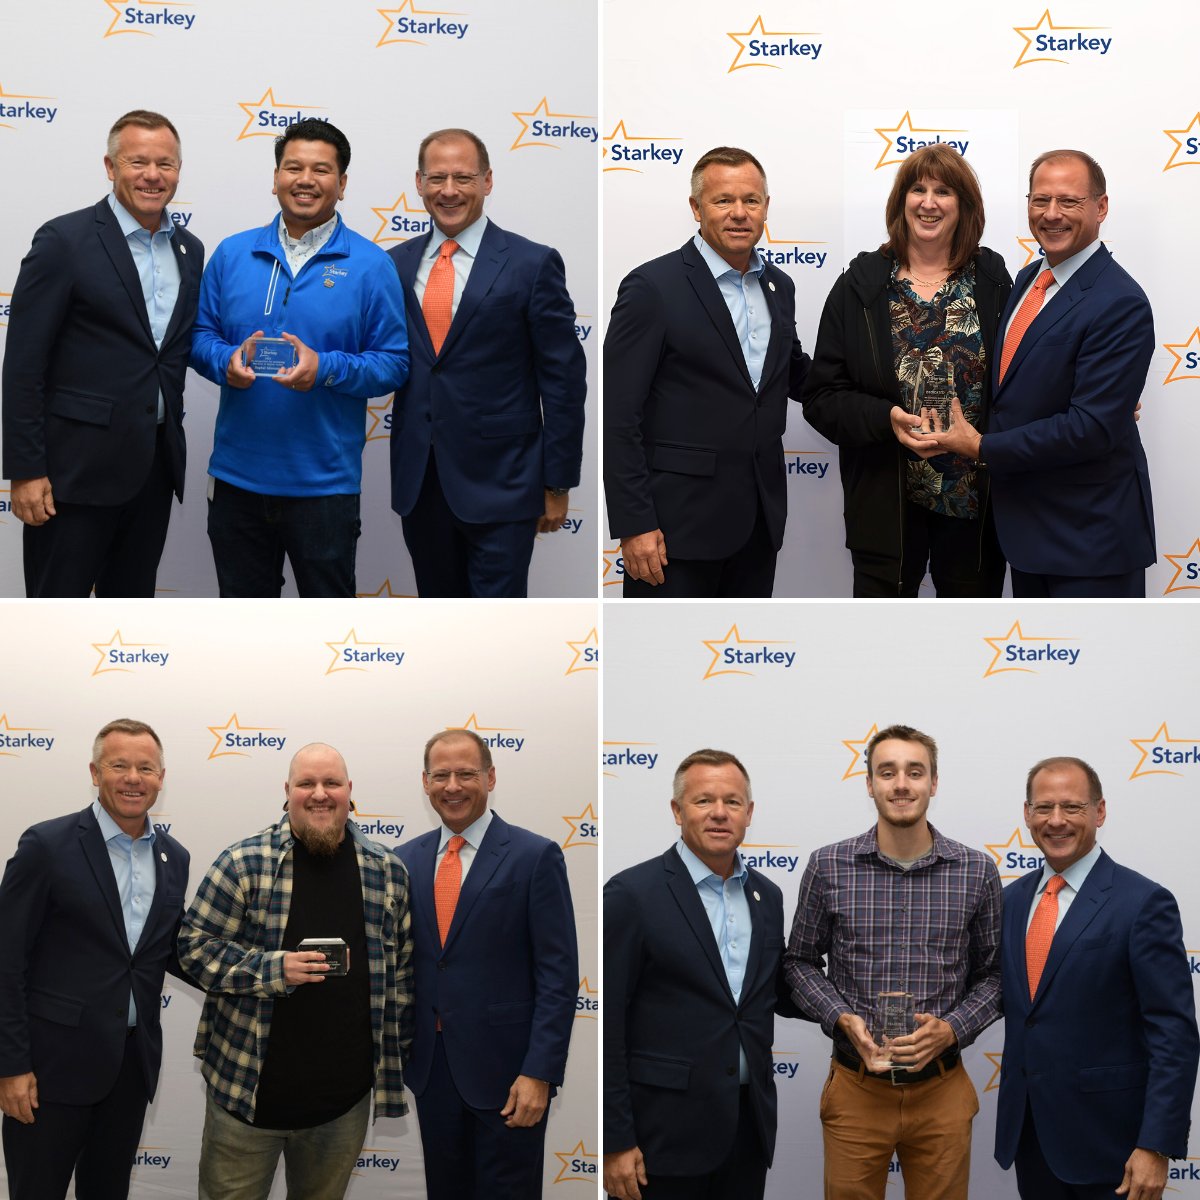 This week, we recognized members of our manufacturing team for their craftsmanship and their commitment to @starkeyhearing’s core values. These people put caring into each device Starkey creates. #NationalManufacturingDay #MFGDay23